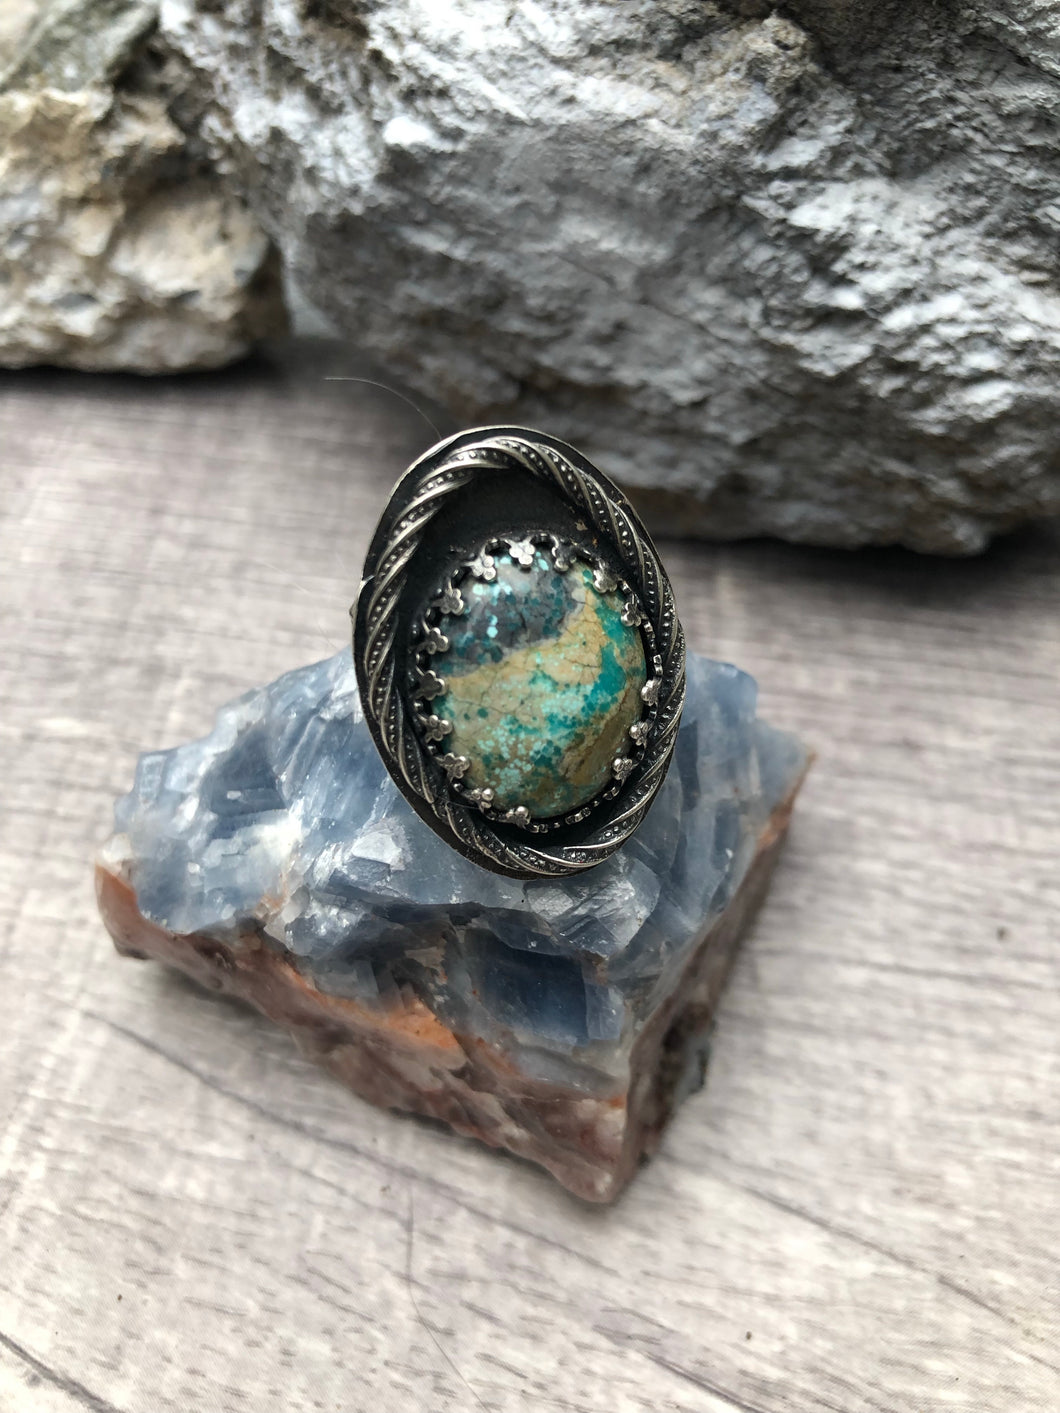 Tibetan Turquoise twist rope accent adjustable sterling silver ring.